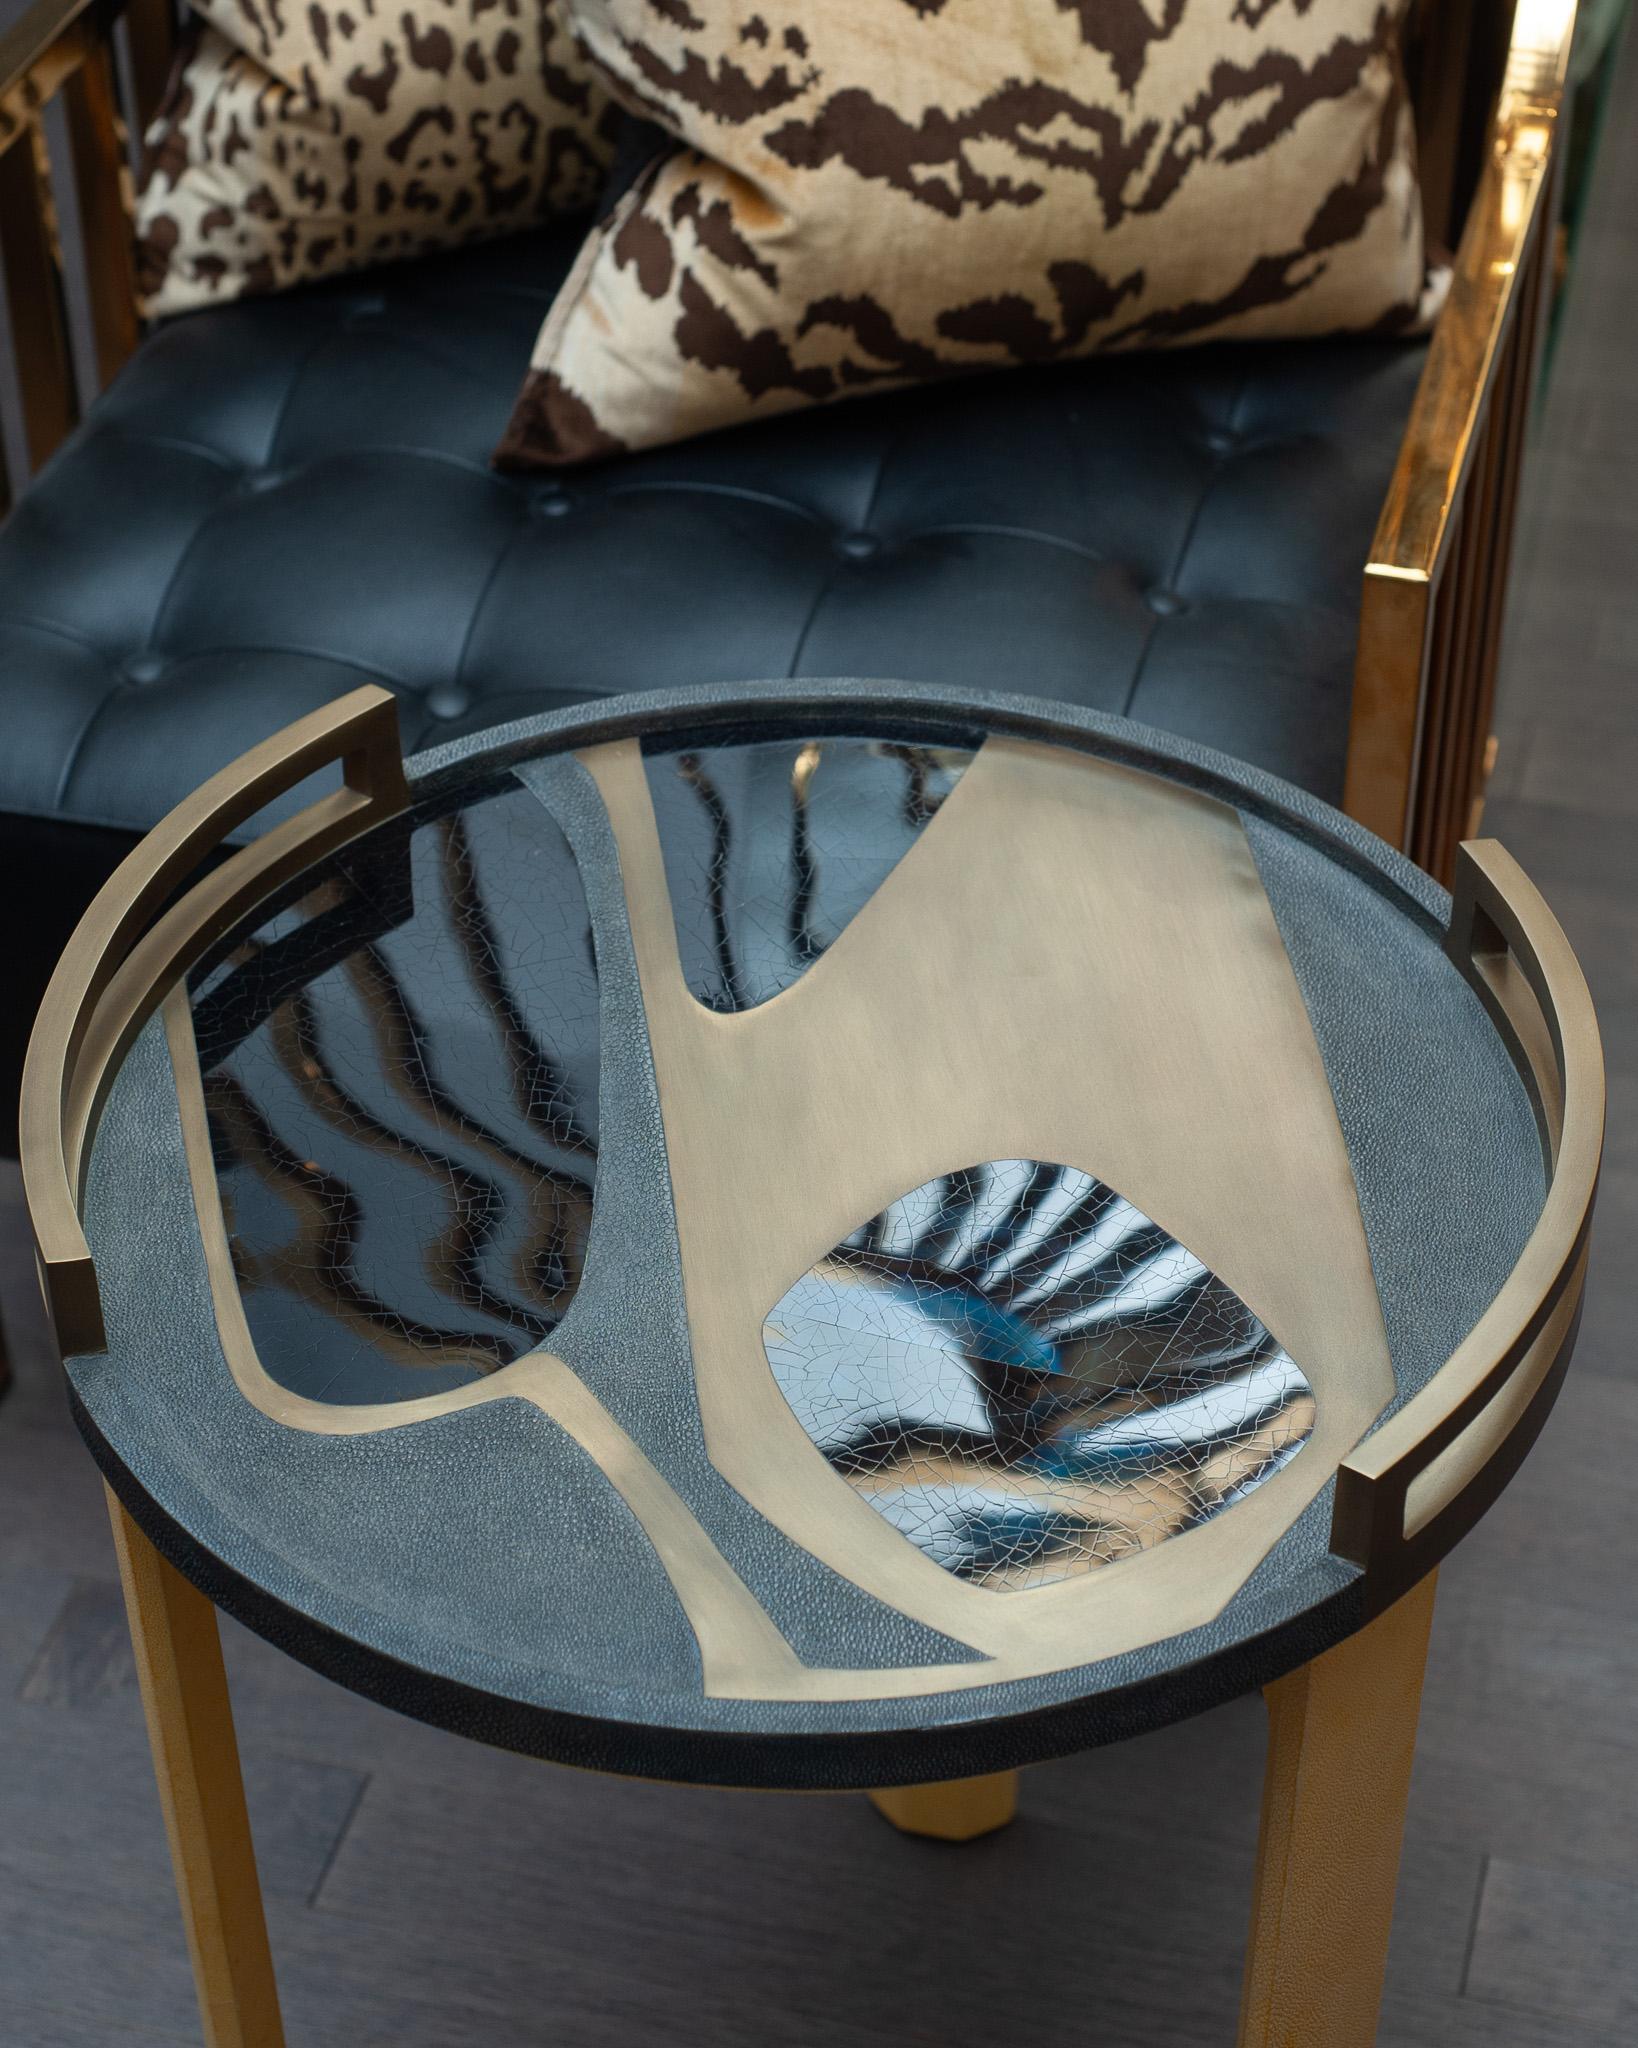 In stock now - A stunning and magnificently made R & Y Augousti large circular serving tray, with brass, grey shagreen, blue penshell and black penshell inlay. Expertly crafted, this large tray is a perfect accessory for serving and is as beautiful